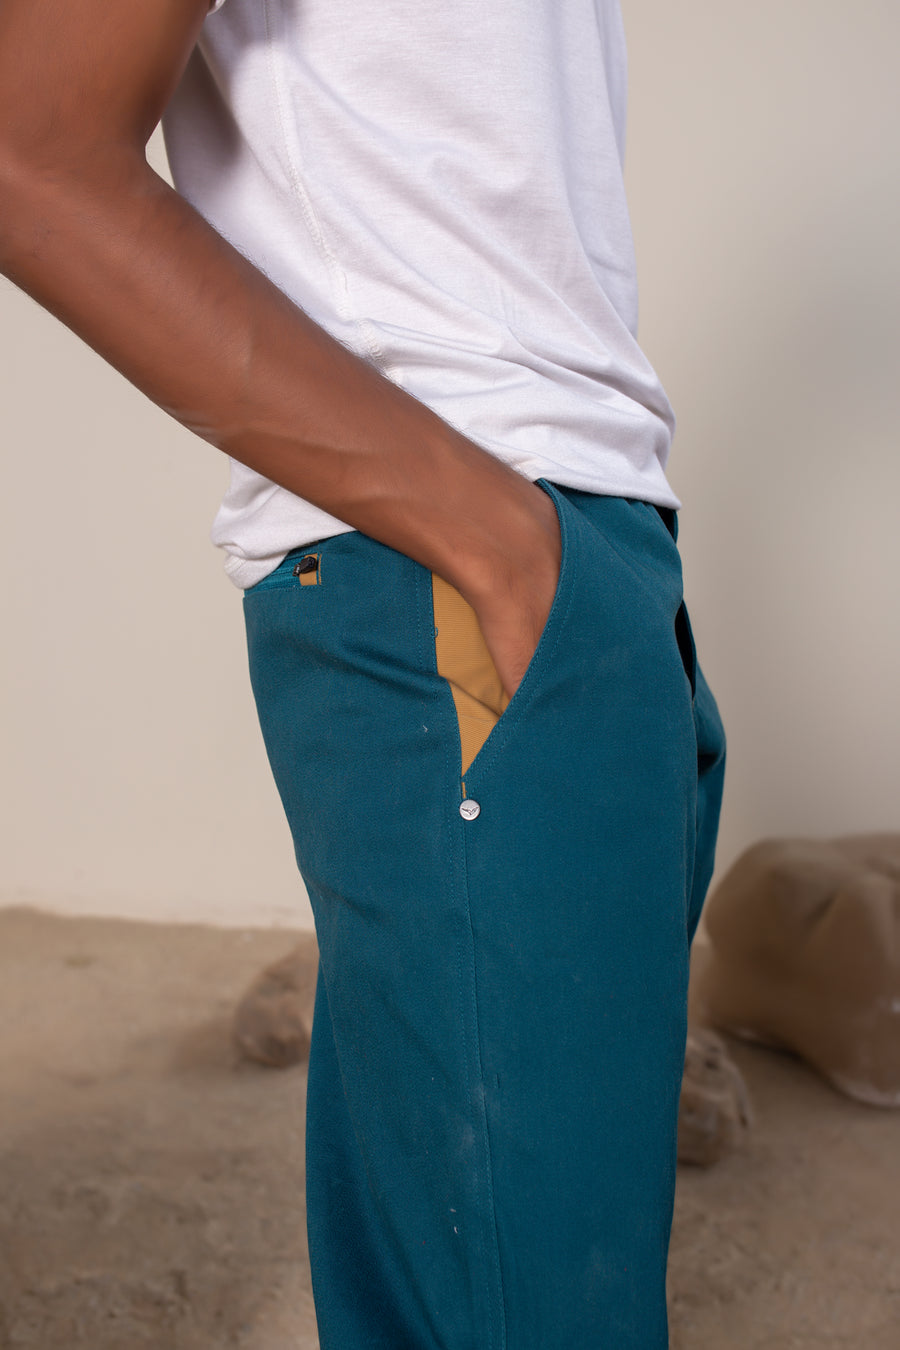 Men's Sequoia Canvas Pant in Teal | VOLO Apparel | Made with an ultra durable stretch cotton canvas, the Sequoia Canvas Pant is our ultimate six pocket lifestyle pant. Featuring a modern slim fit and a 33 inch inseam, a 3 point gusset, snap button security pockets, 2 zipper pockets and the comfort of durable canvas, these are your go to adventure pants that can handle anything you throw at them.